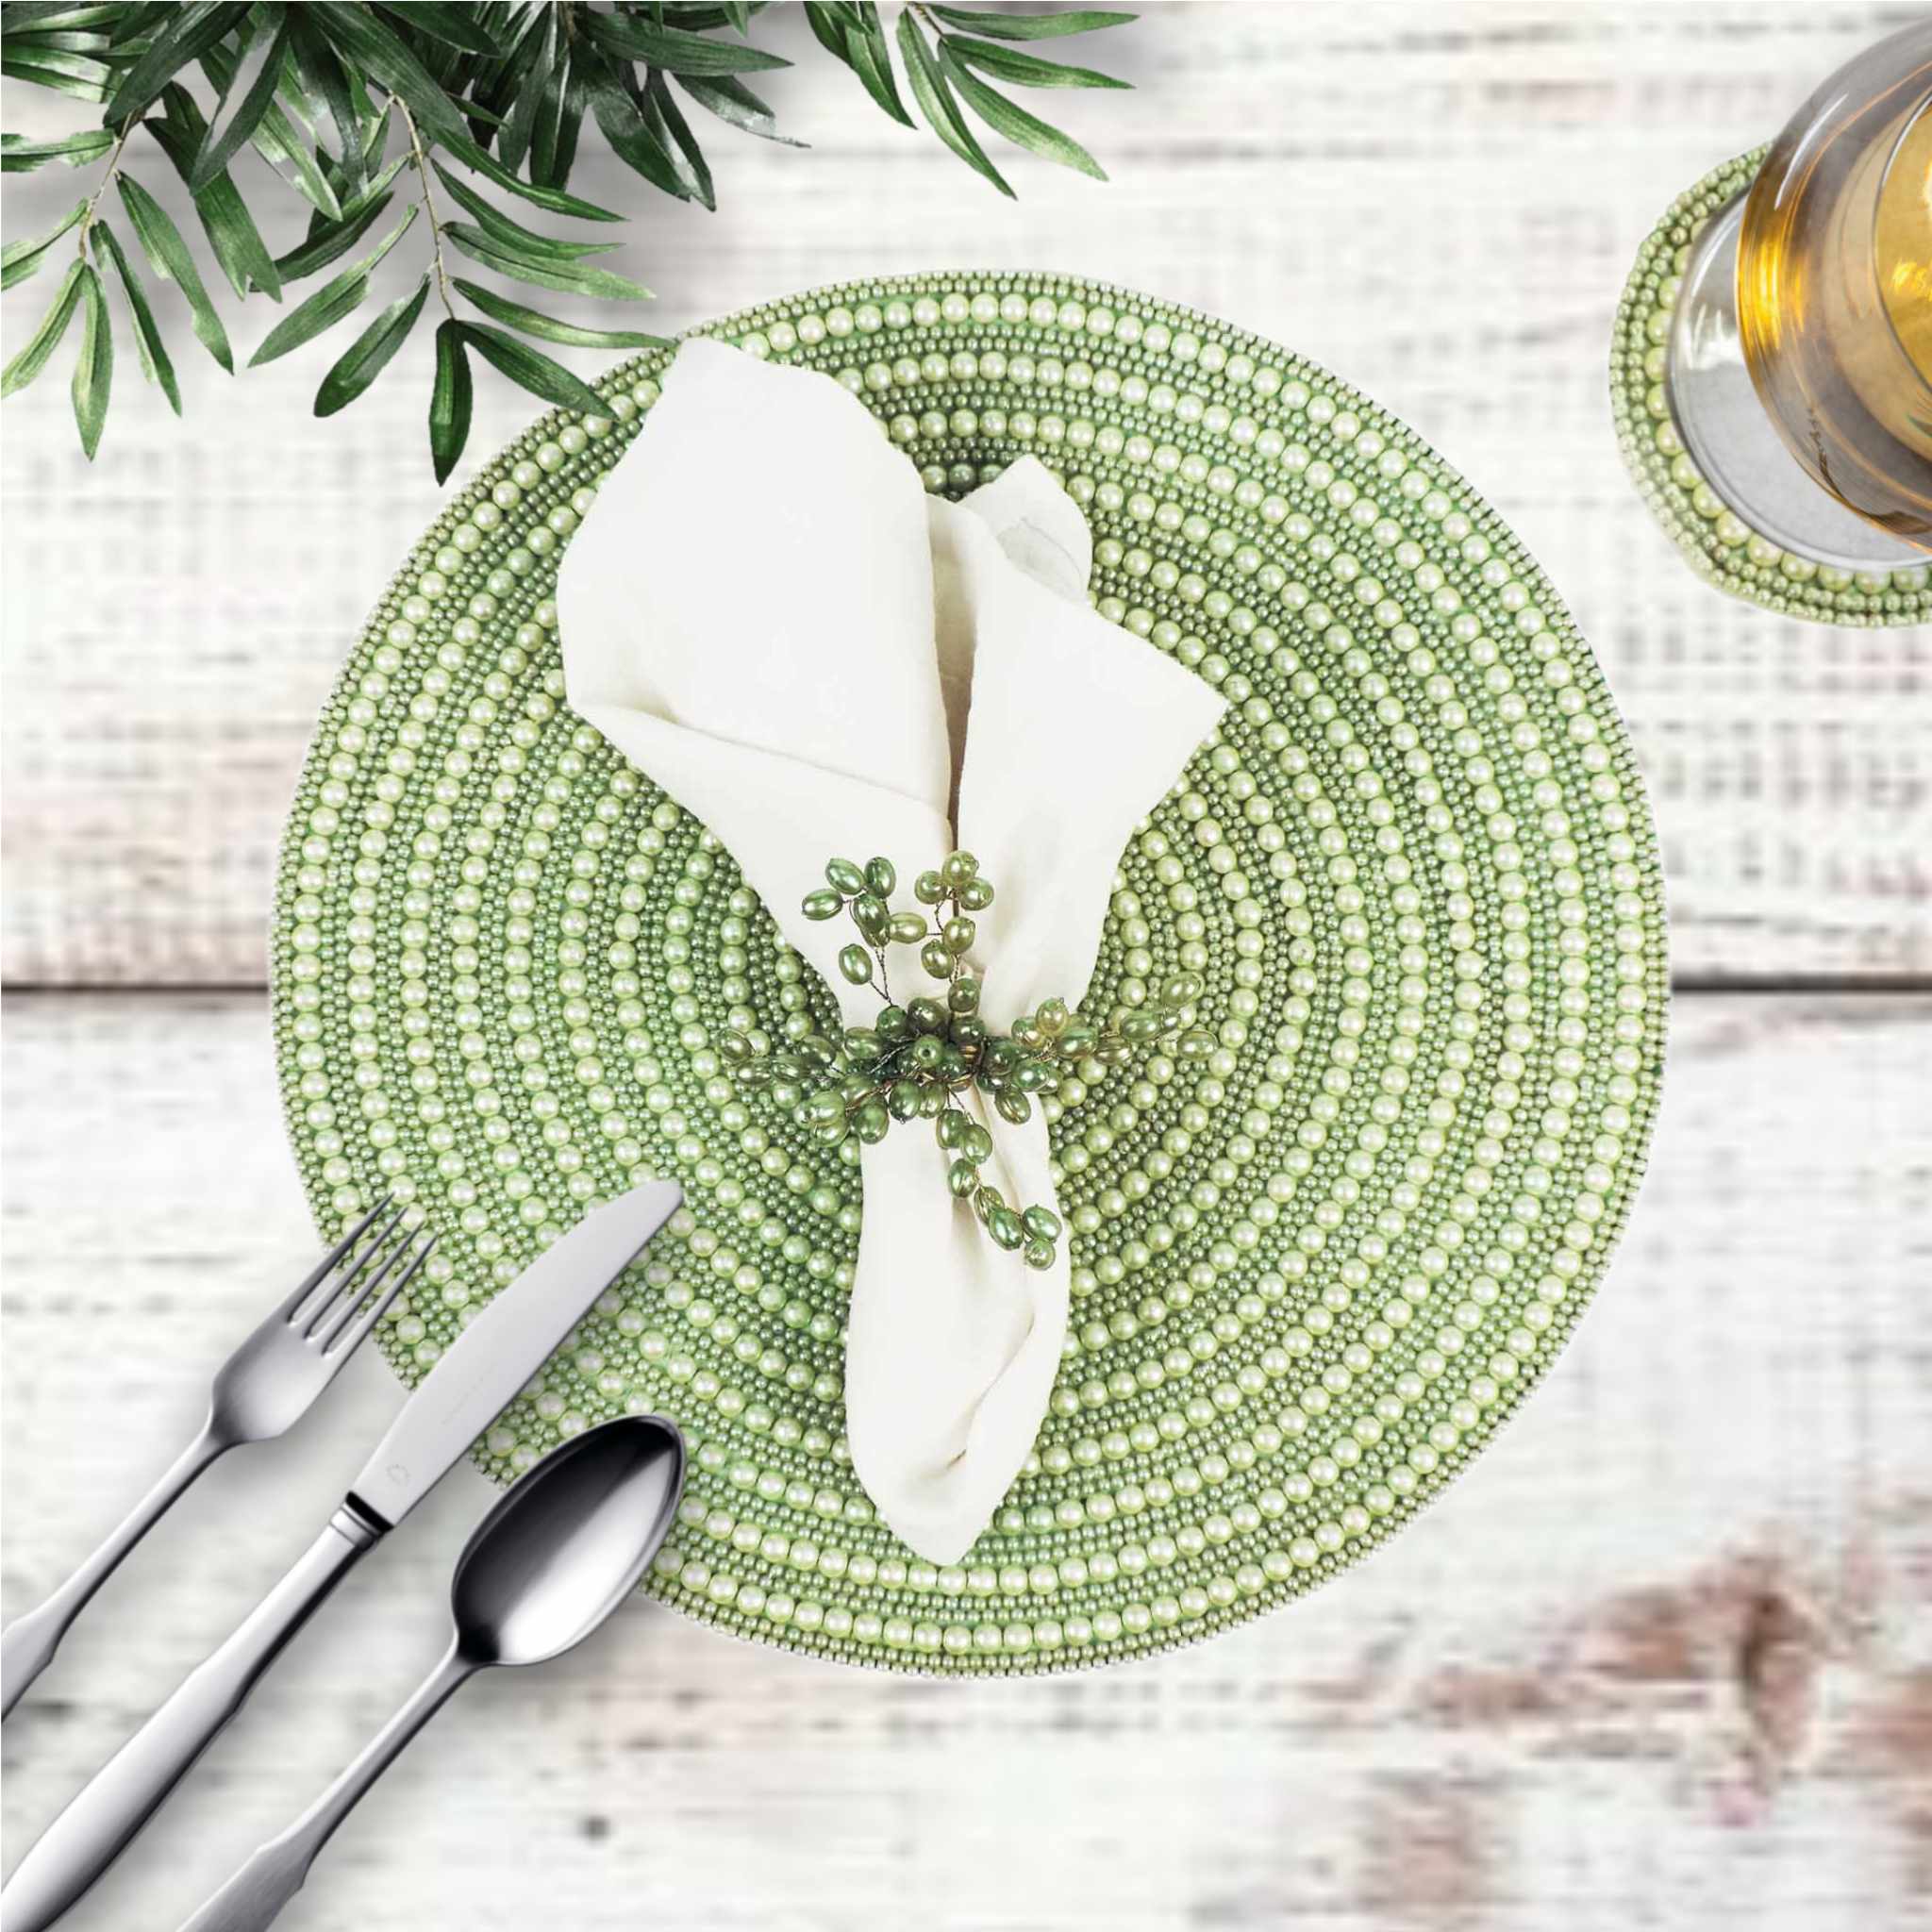 Whirl Bead Embroidered Placemat in Light Green, Set of 2/4